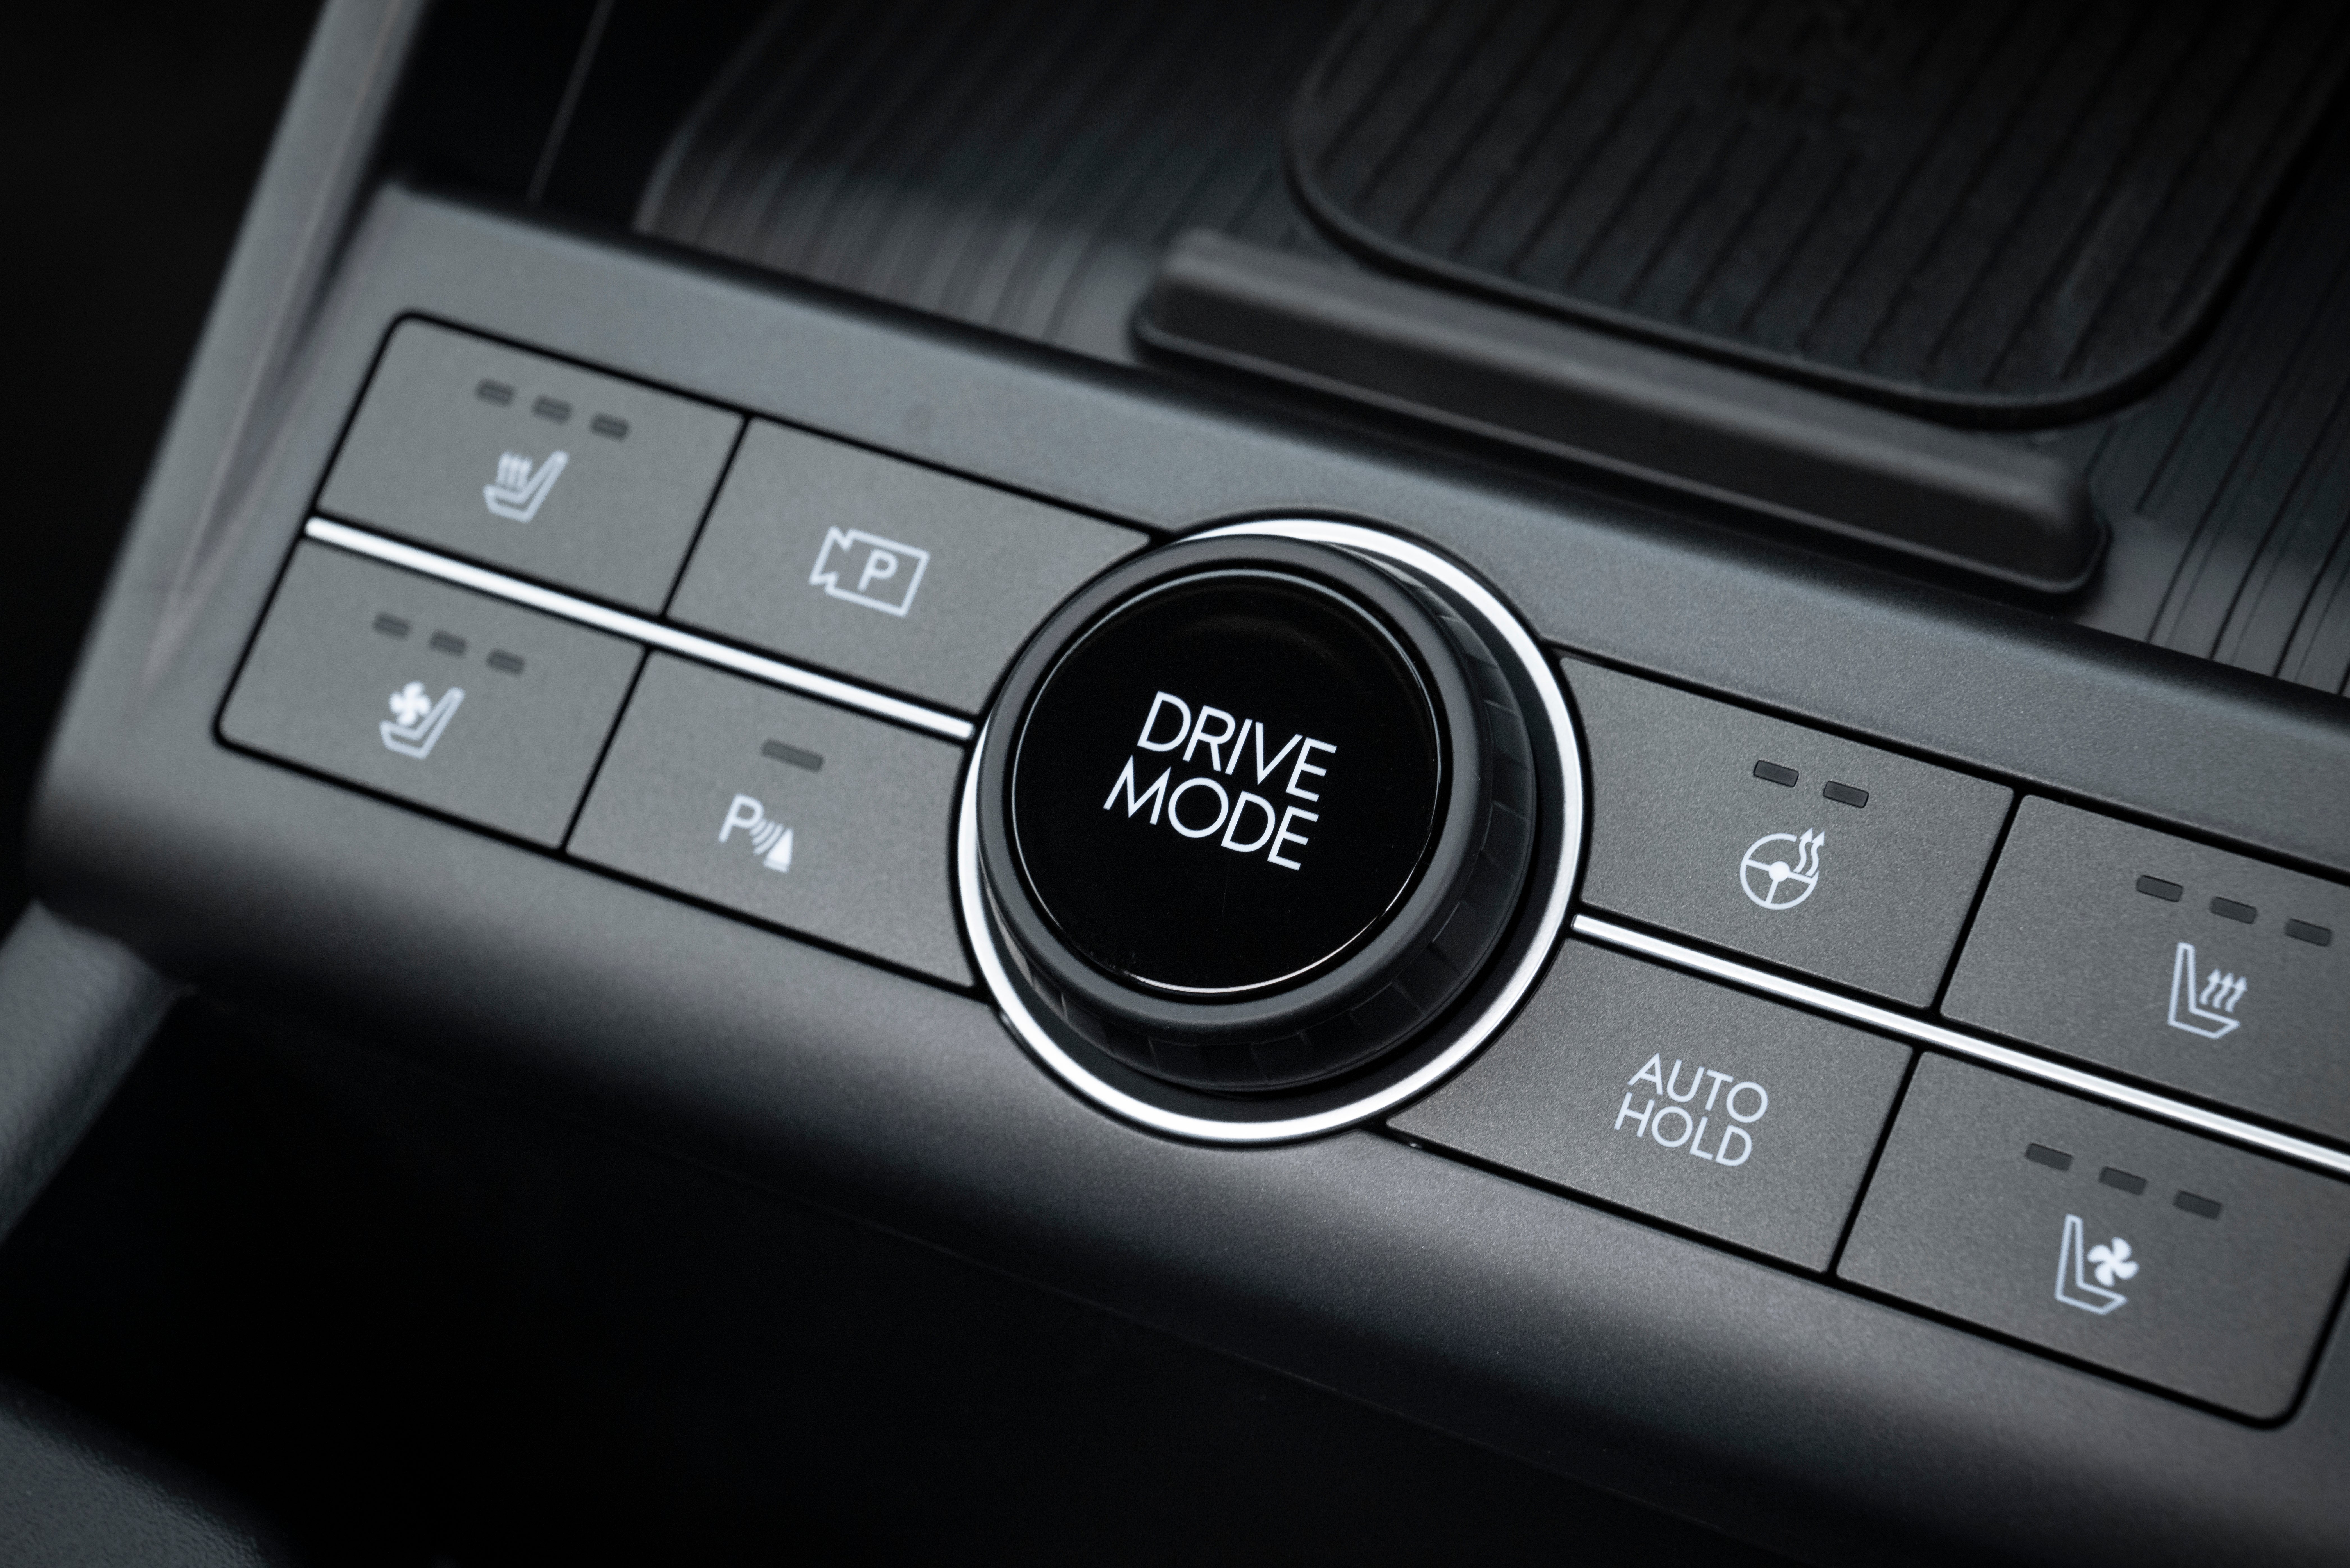 The Kona’s ‘drive mode’ easily changes the driving style between normal, eco and sport